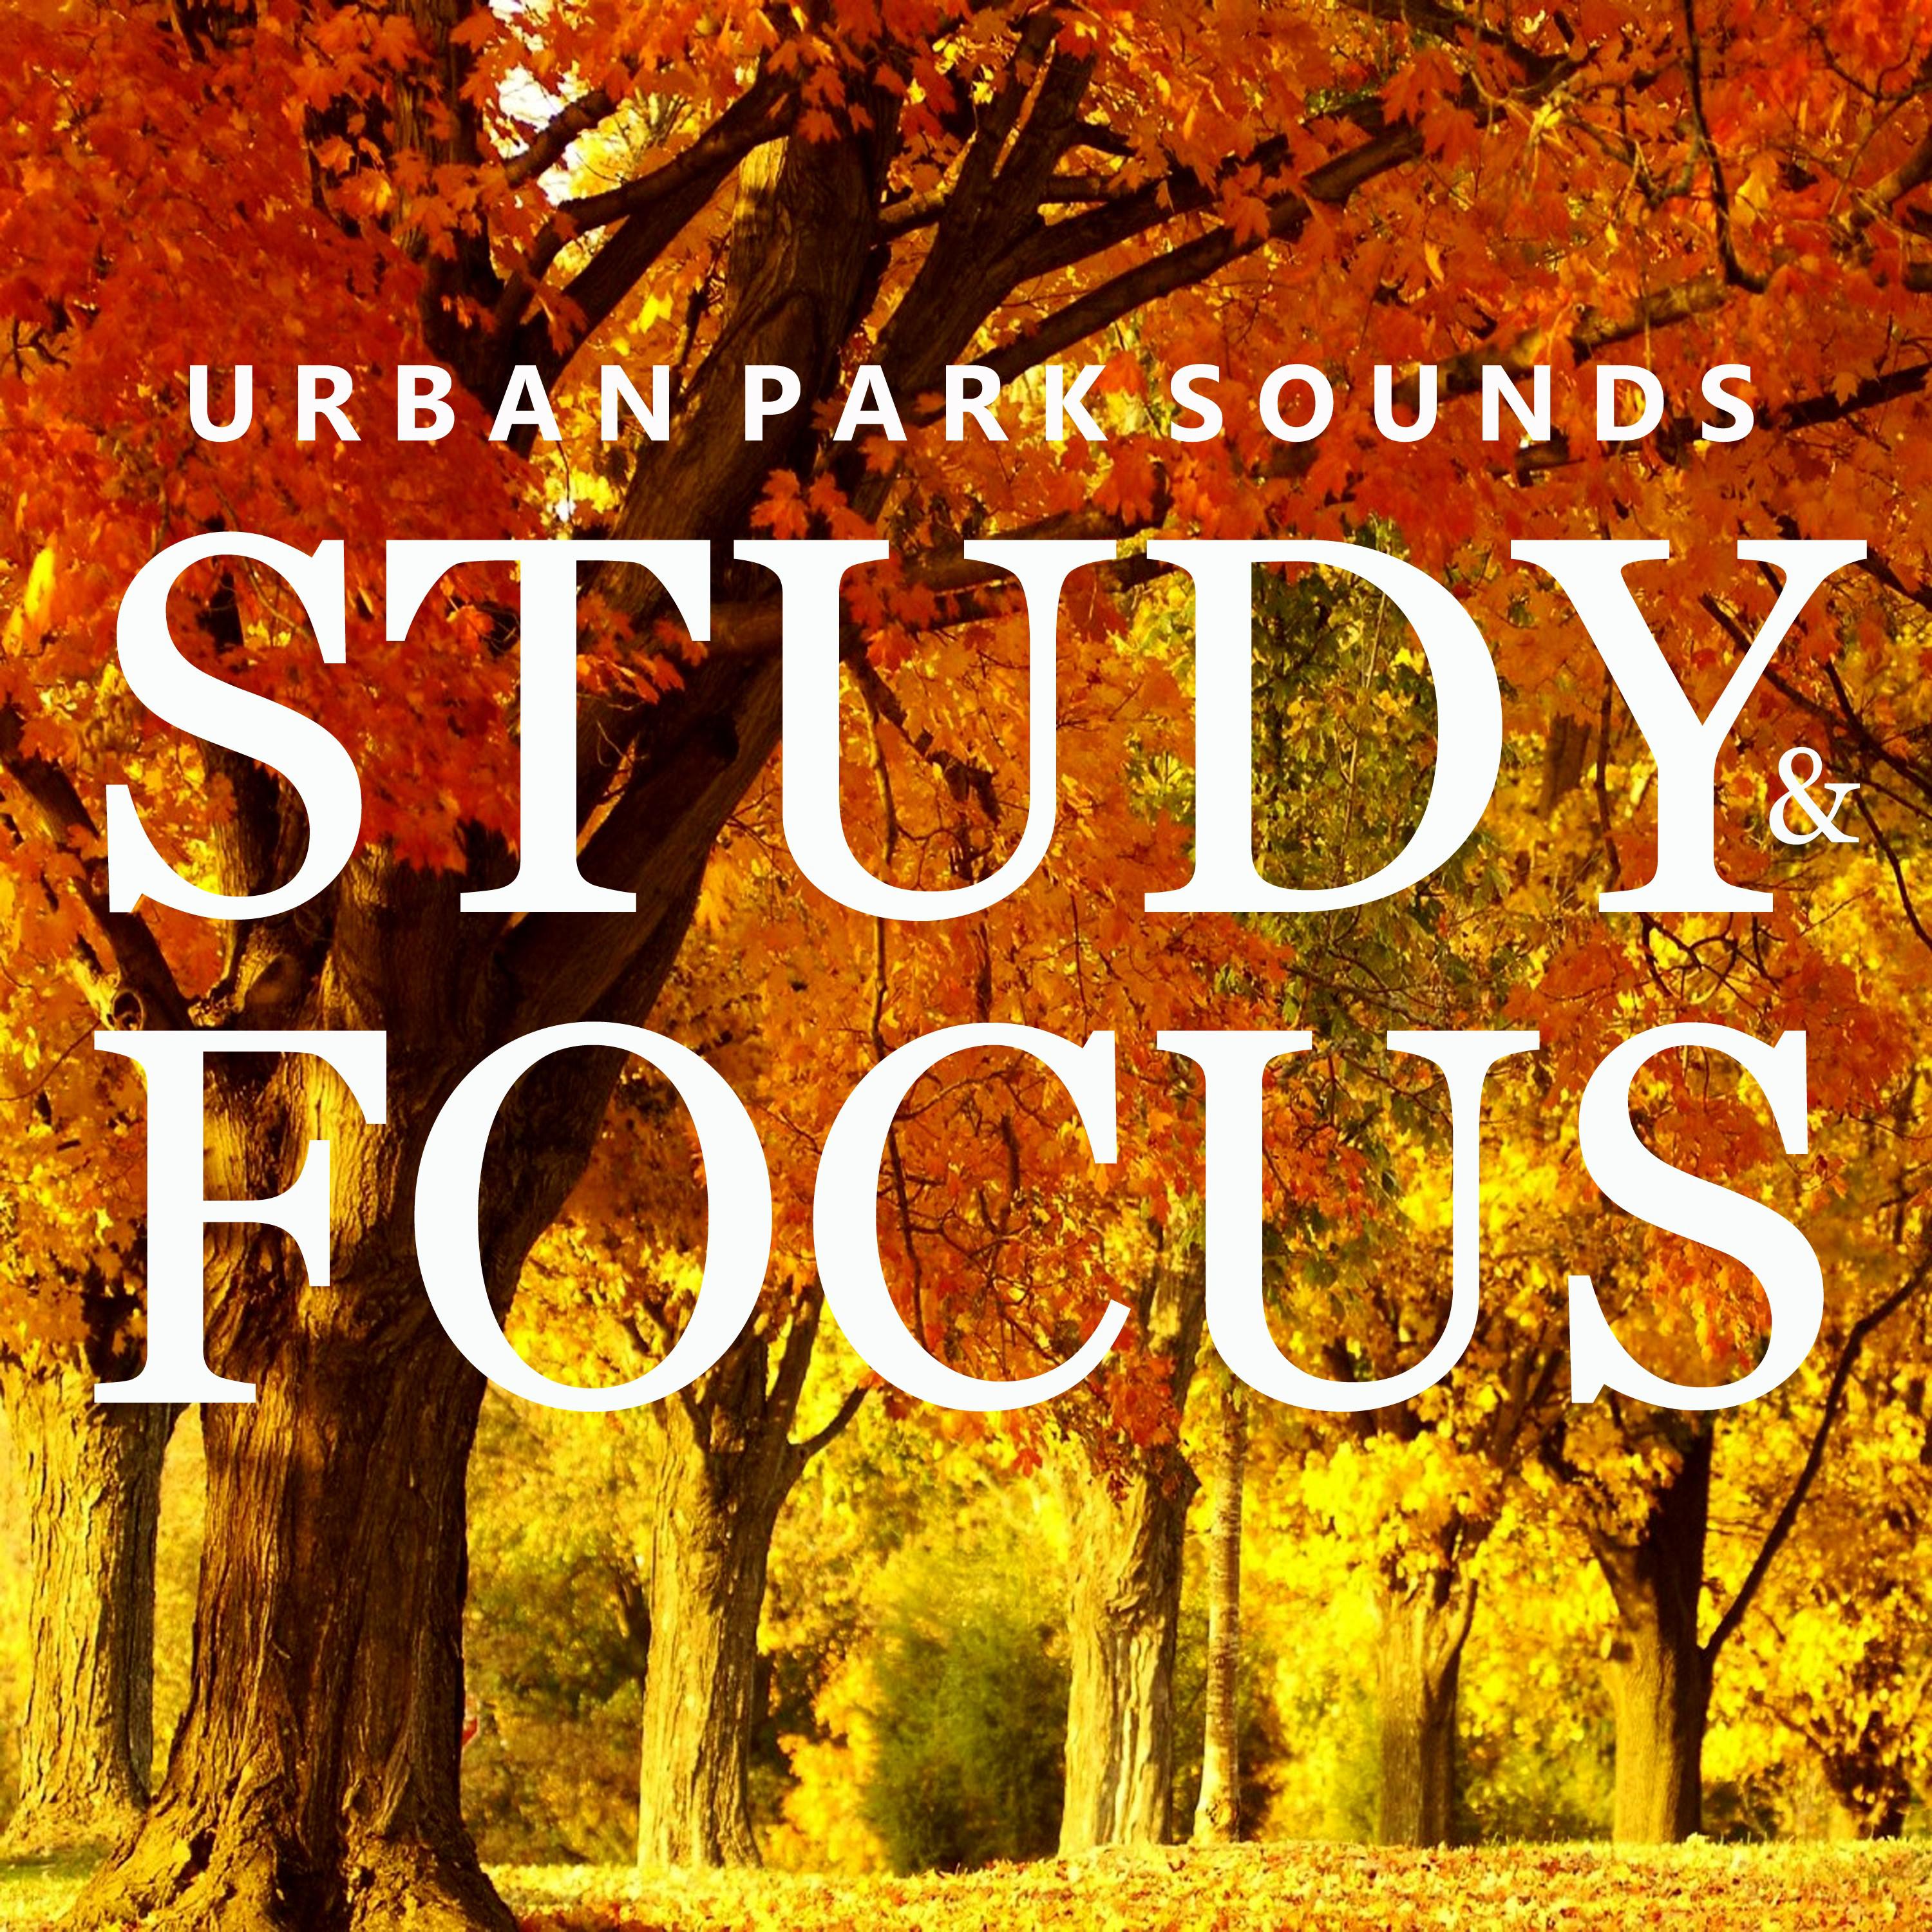 Urban Park Sounds for Studying, Pt. 10